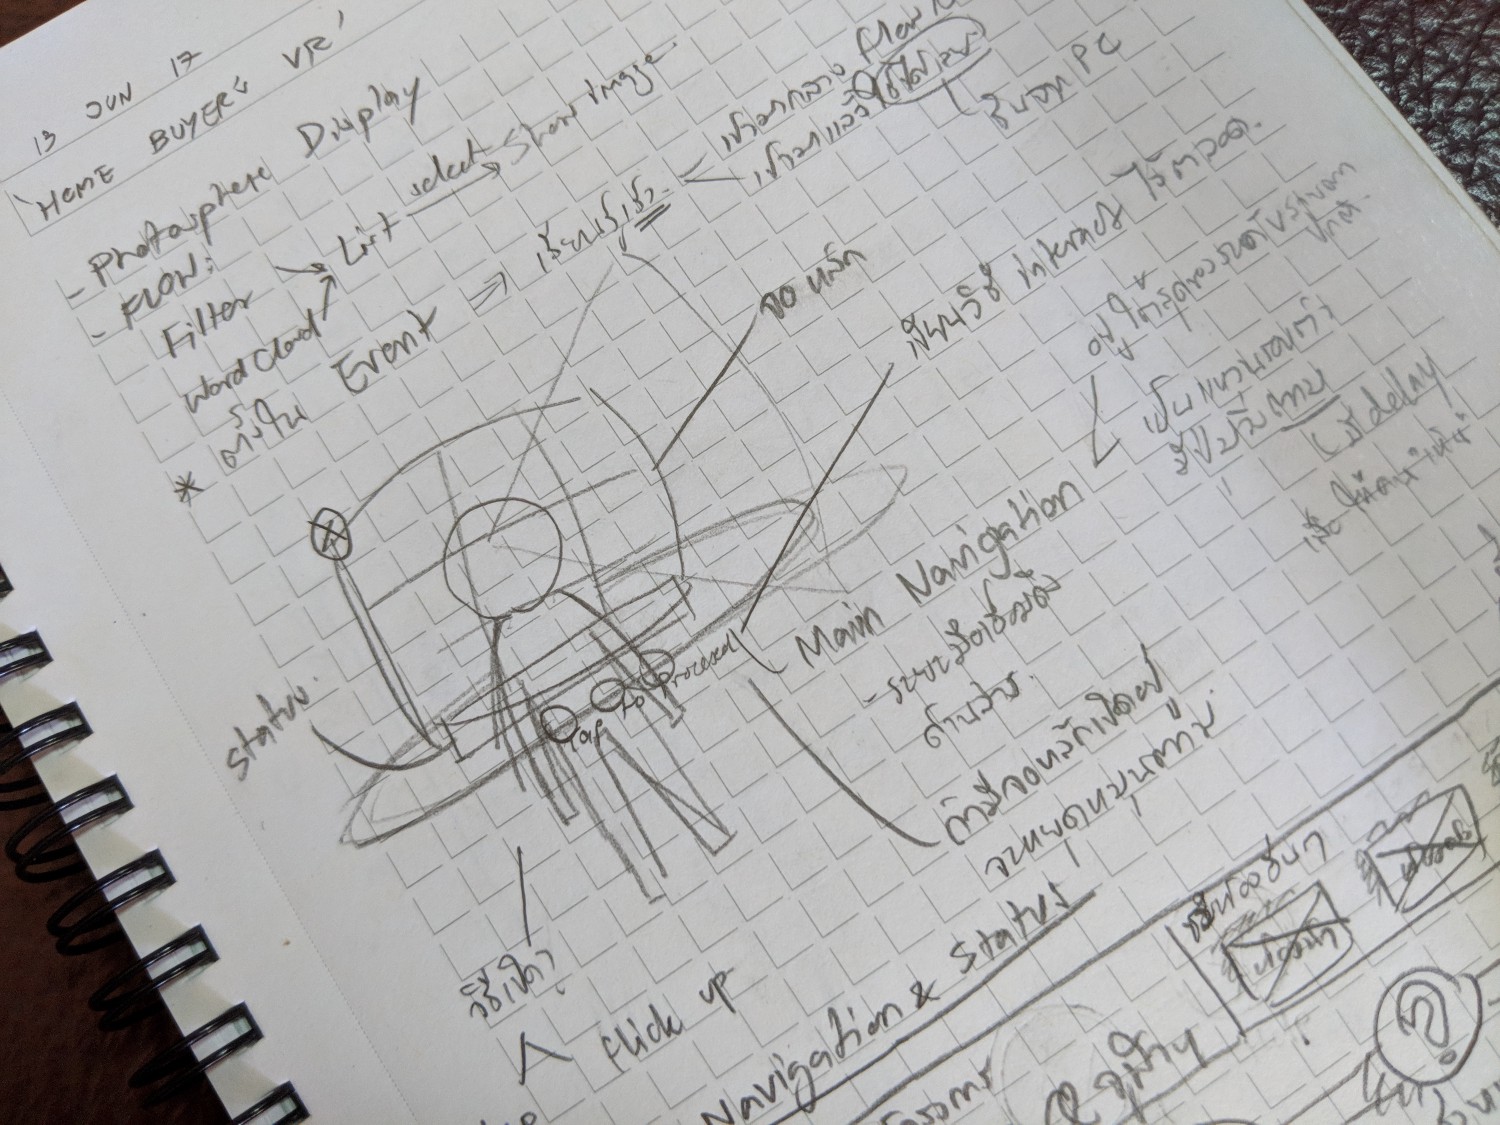 Sketches and Brainstorming of modes of interaction.